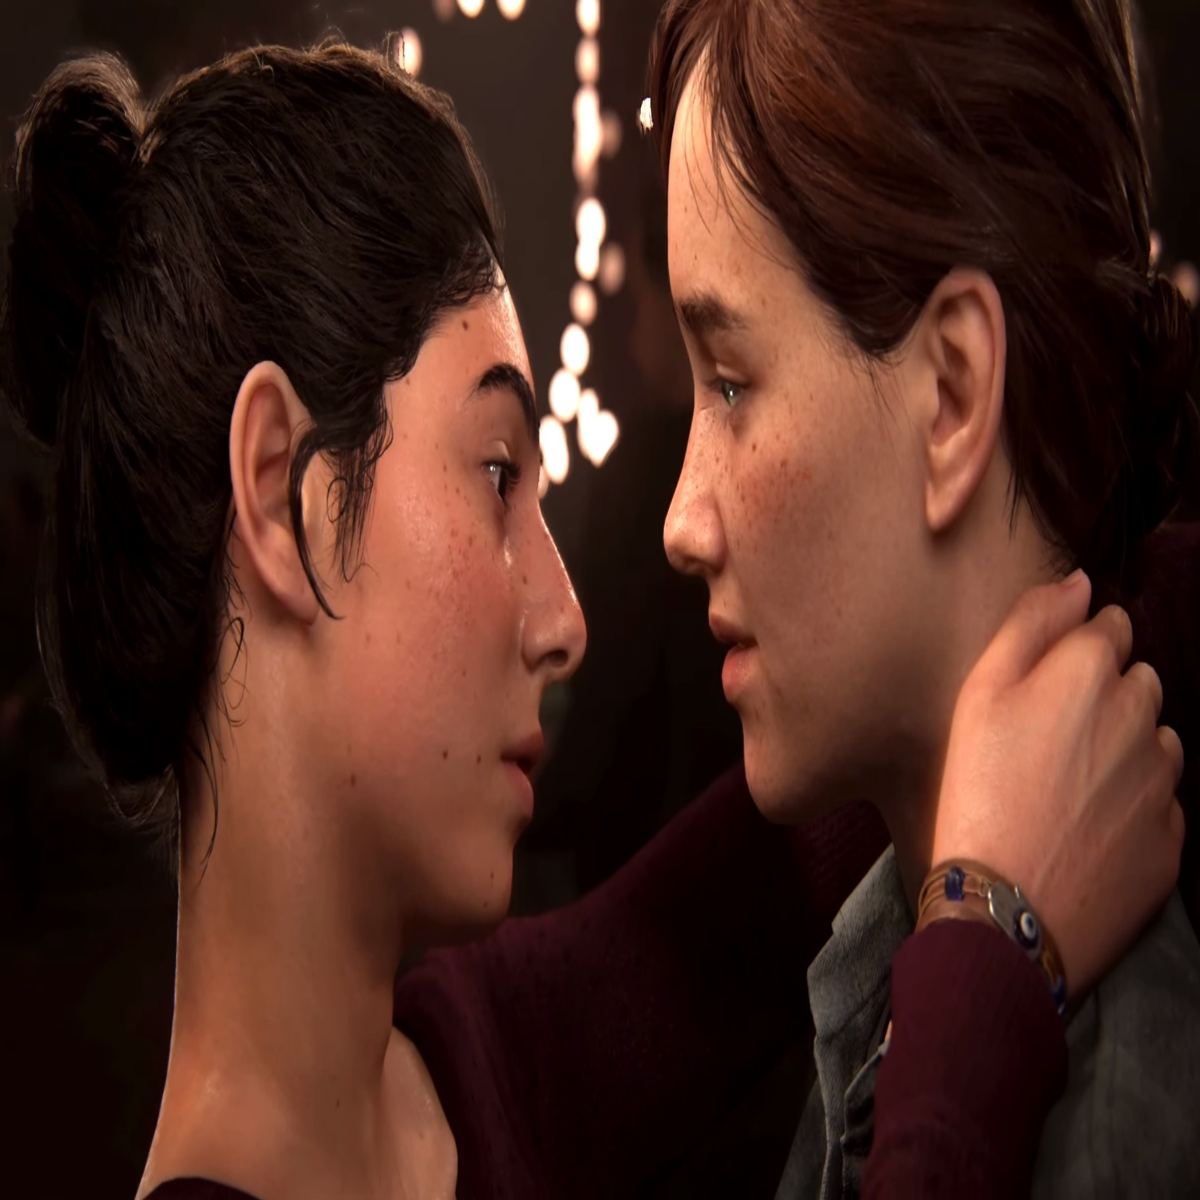 The Last of Us' Lesbian Lead Is a Light in the Darkness